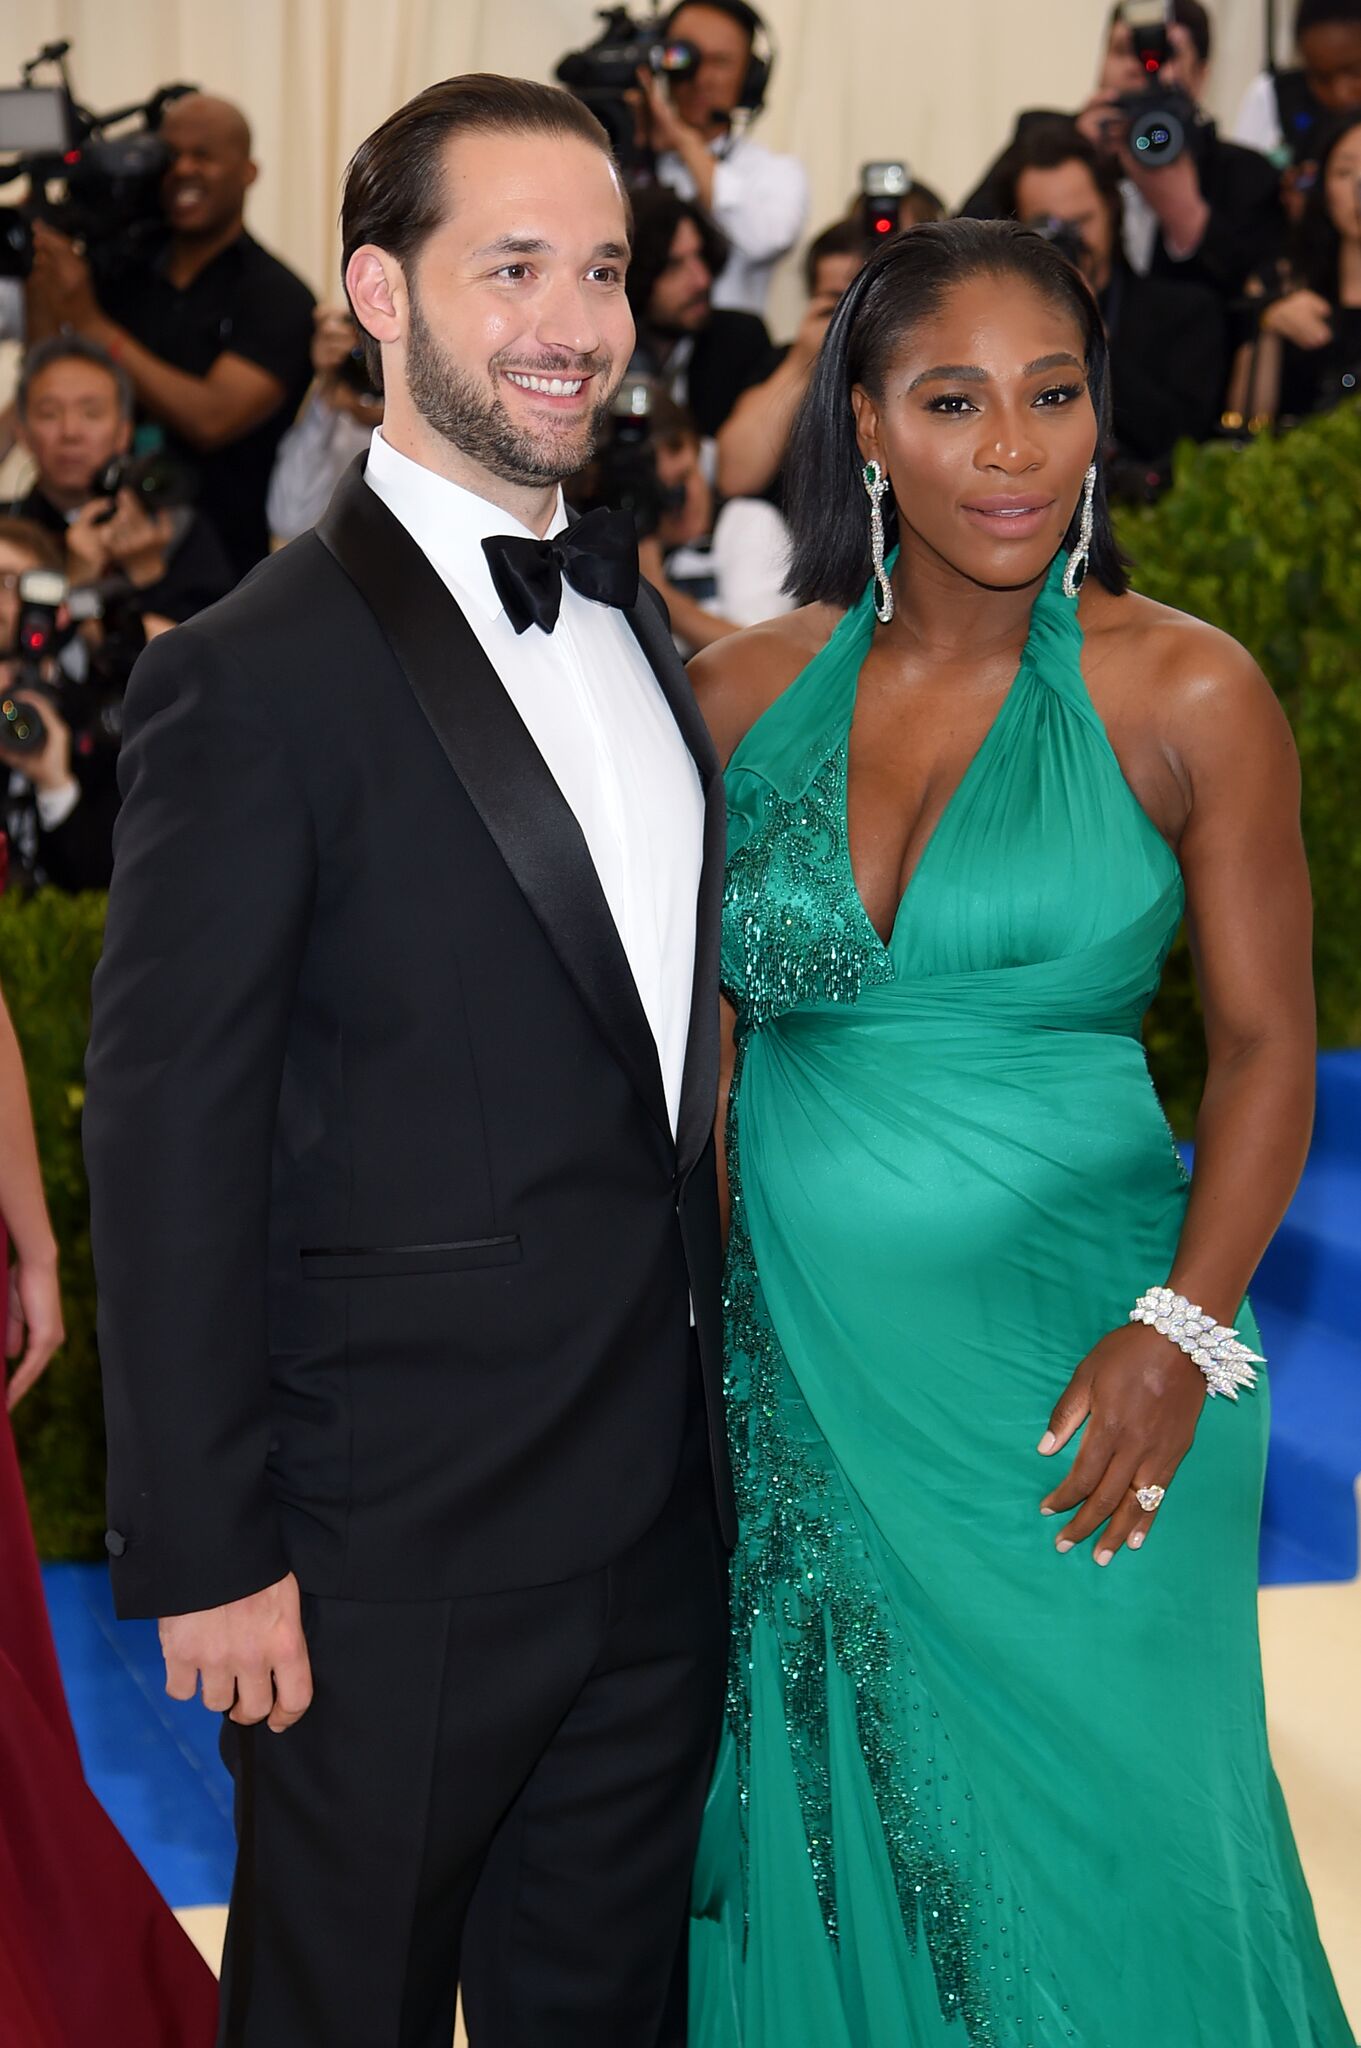 Alexis Ohanian and Serena Williams at the "Rei Kawakubo/Comme des Garcons: Art Of The In-Between" Costume Institute Gala at the Metropolitan Museum of Art on May 1, 2017. | Photo: Getty Images